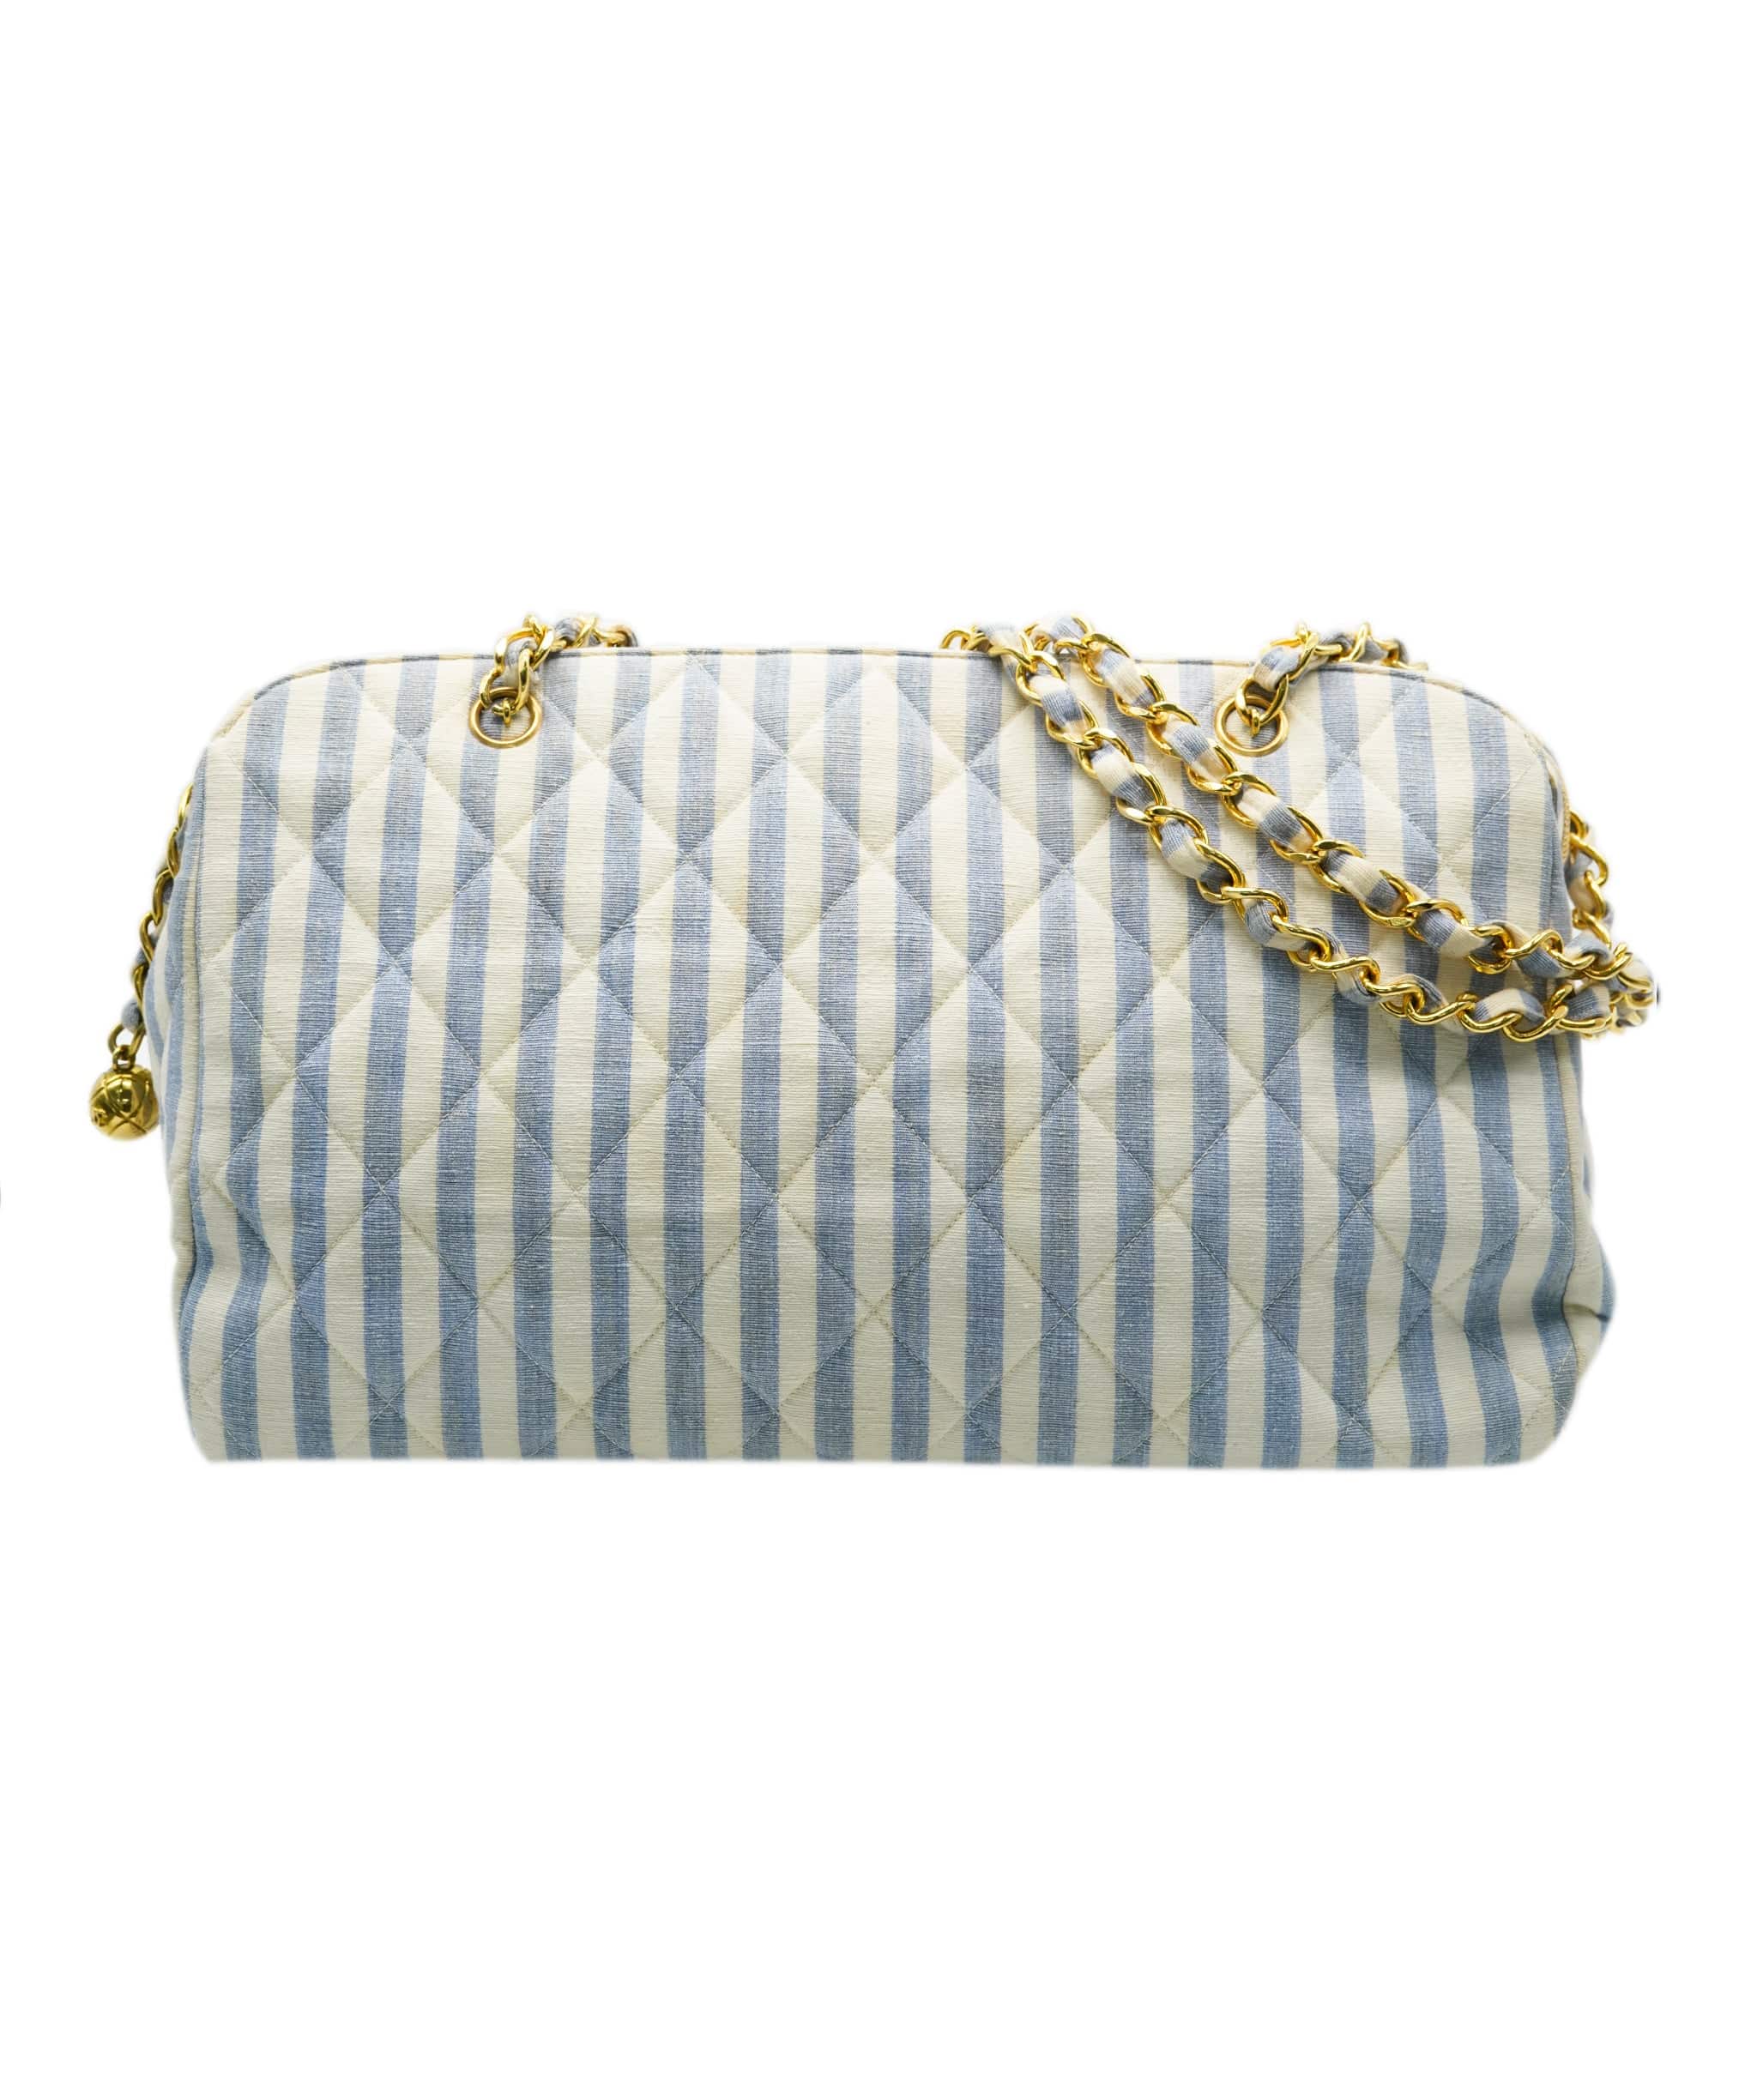 Chanel Chanel Striped Canvas Tote Bag CC 24k Gilded Hardware  AGC1663